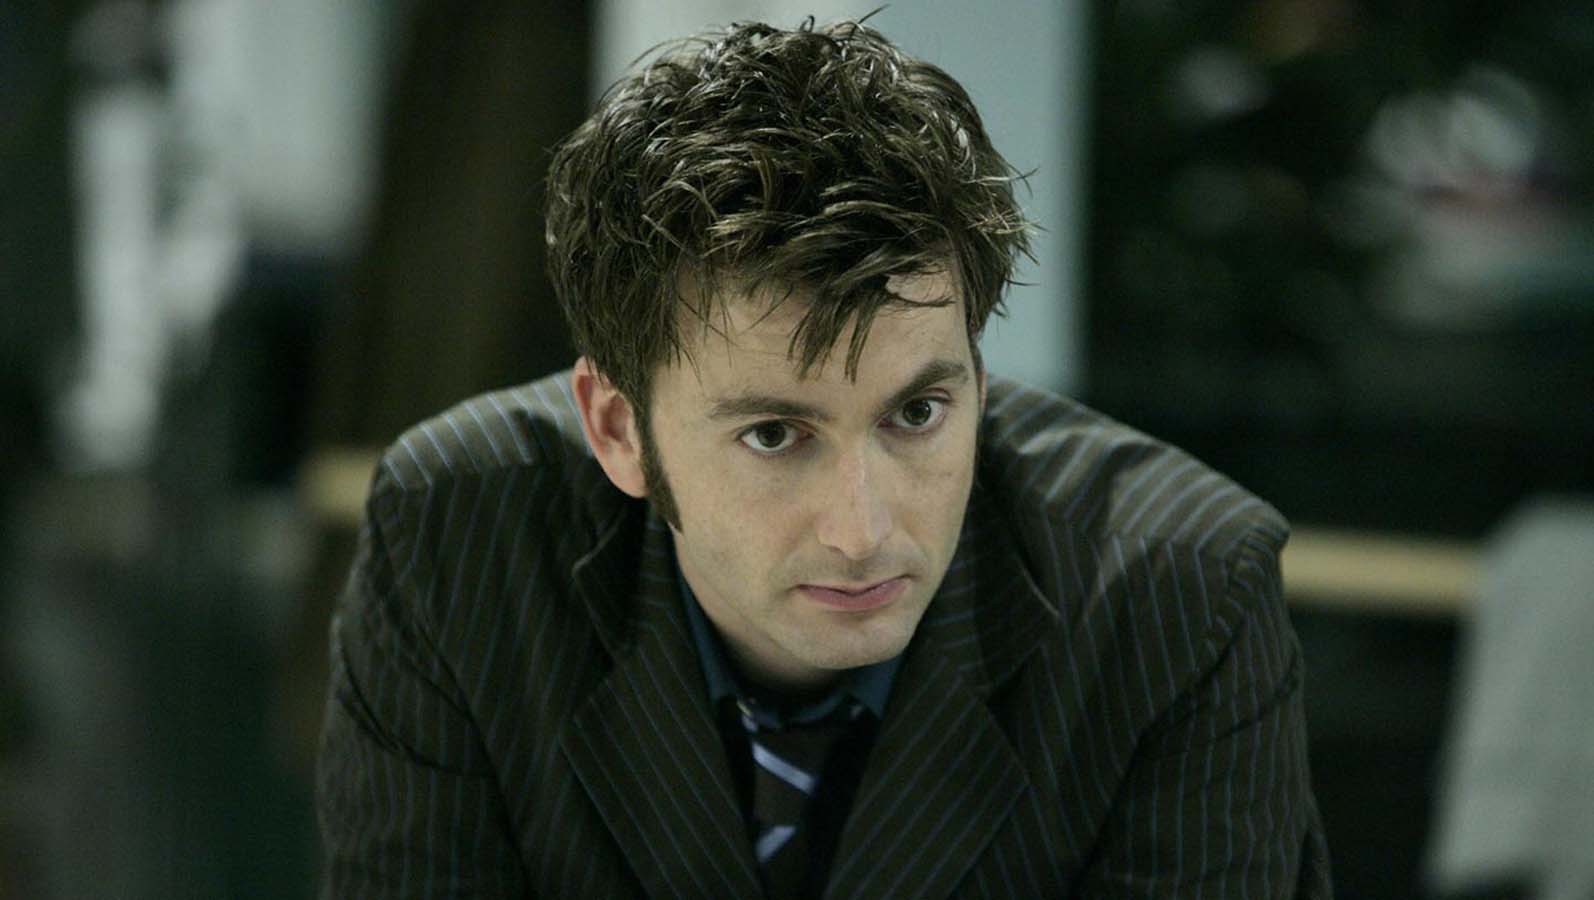 People 1594x900 Doctor Who The Doctor David Tennant TV series men